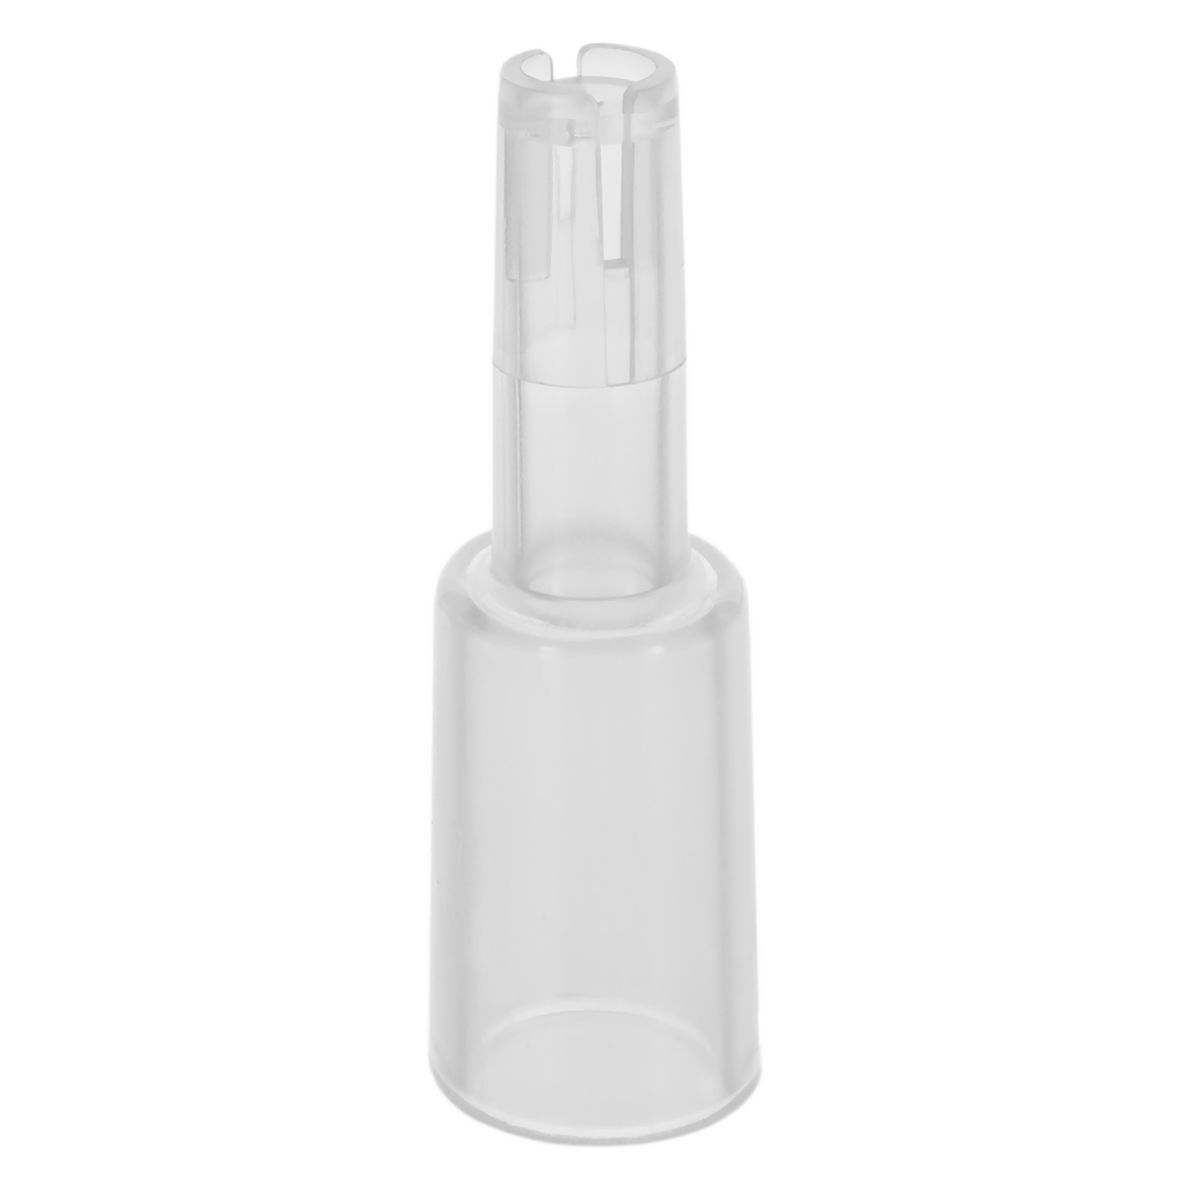 ACE Hygienic mouthpiece for breathalyzer 25 pieces with rebound breather